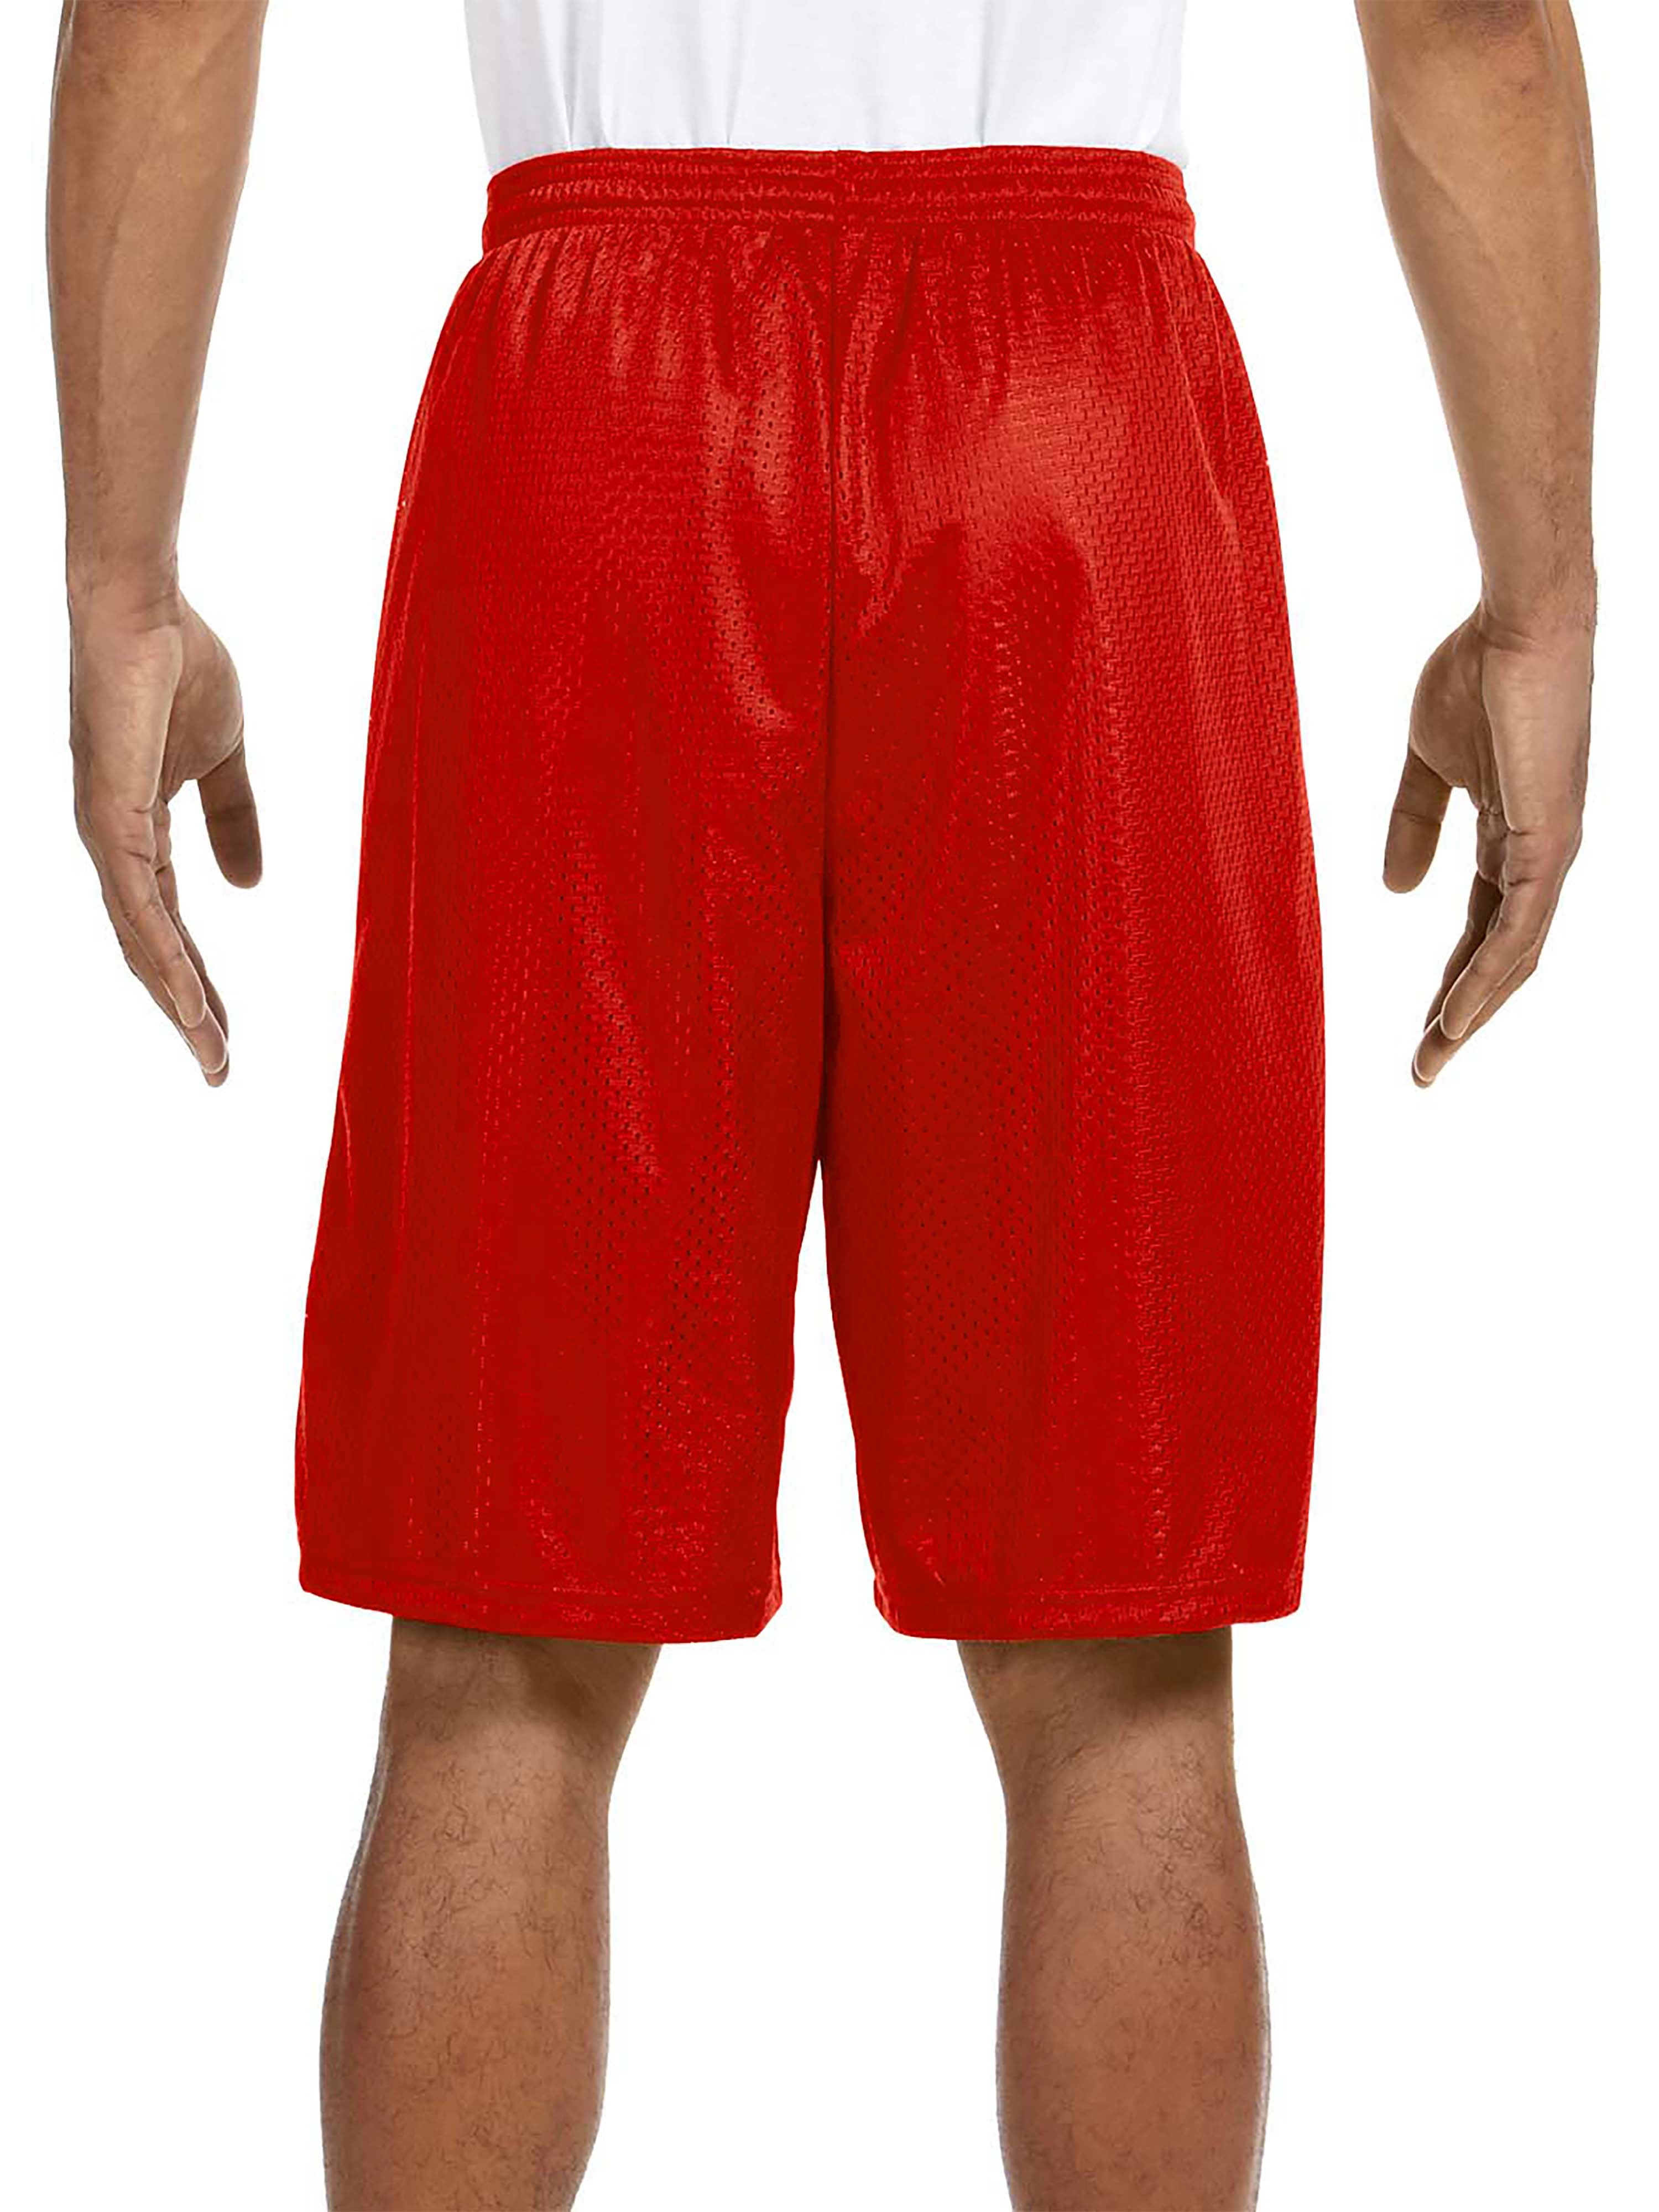 men's mesh shorts with pockets